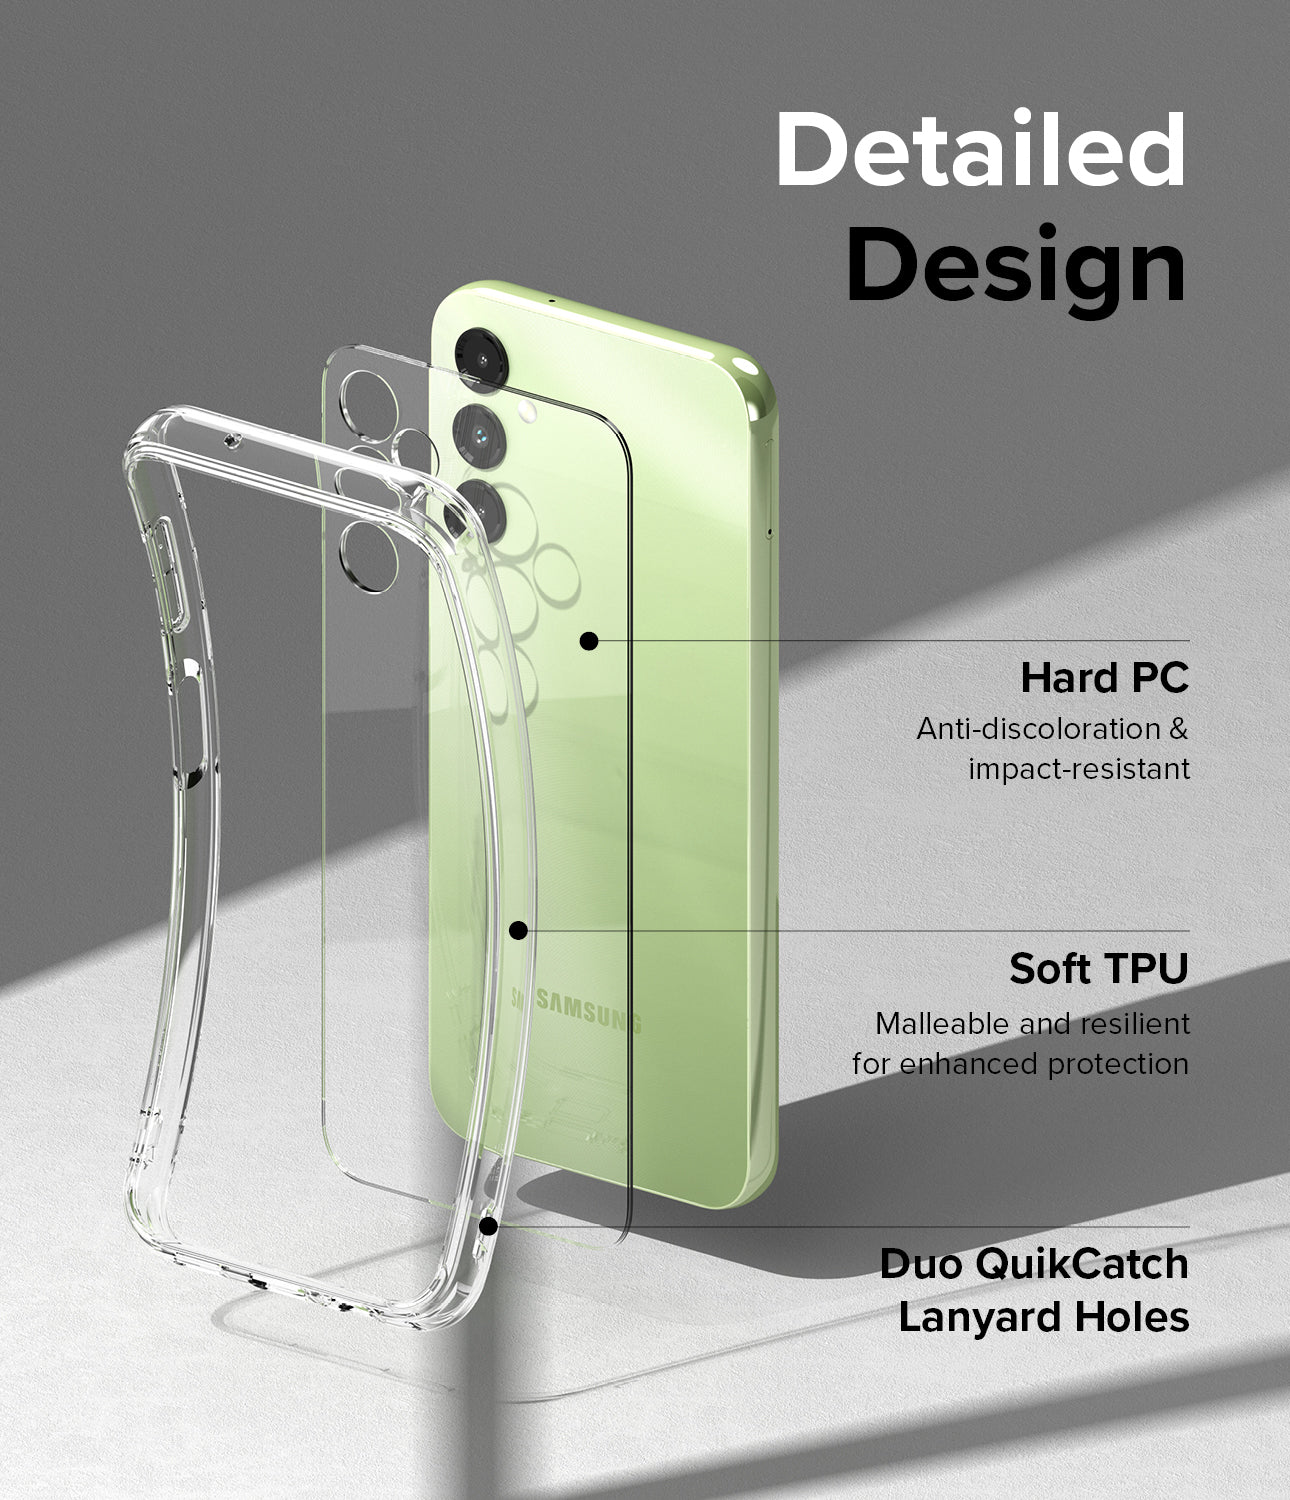 Detailed Design l Hard PC - Anti-discoloration & impact-resistant. Soft TPU - Malleable and resilient for enhanced protection. Duo QuikCatch Lanyard Holes.